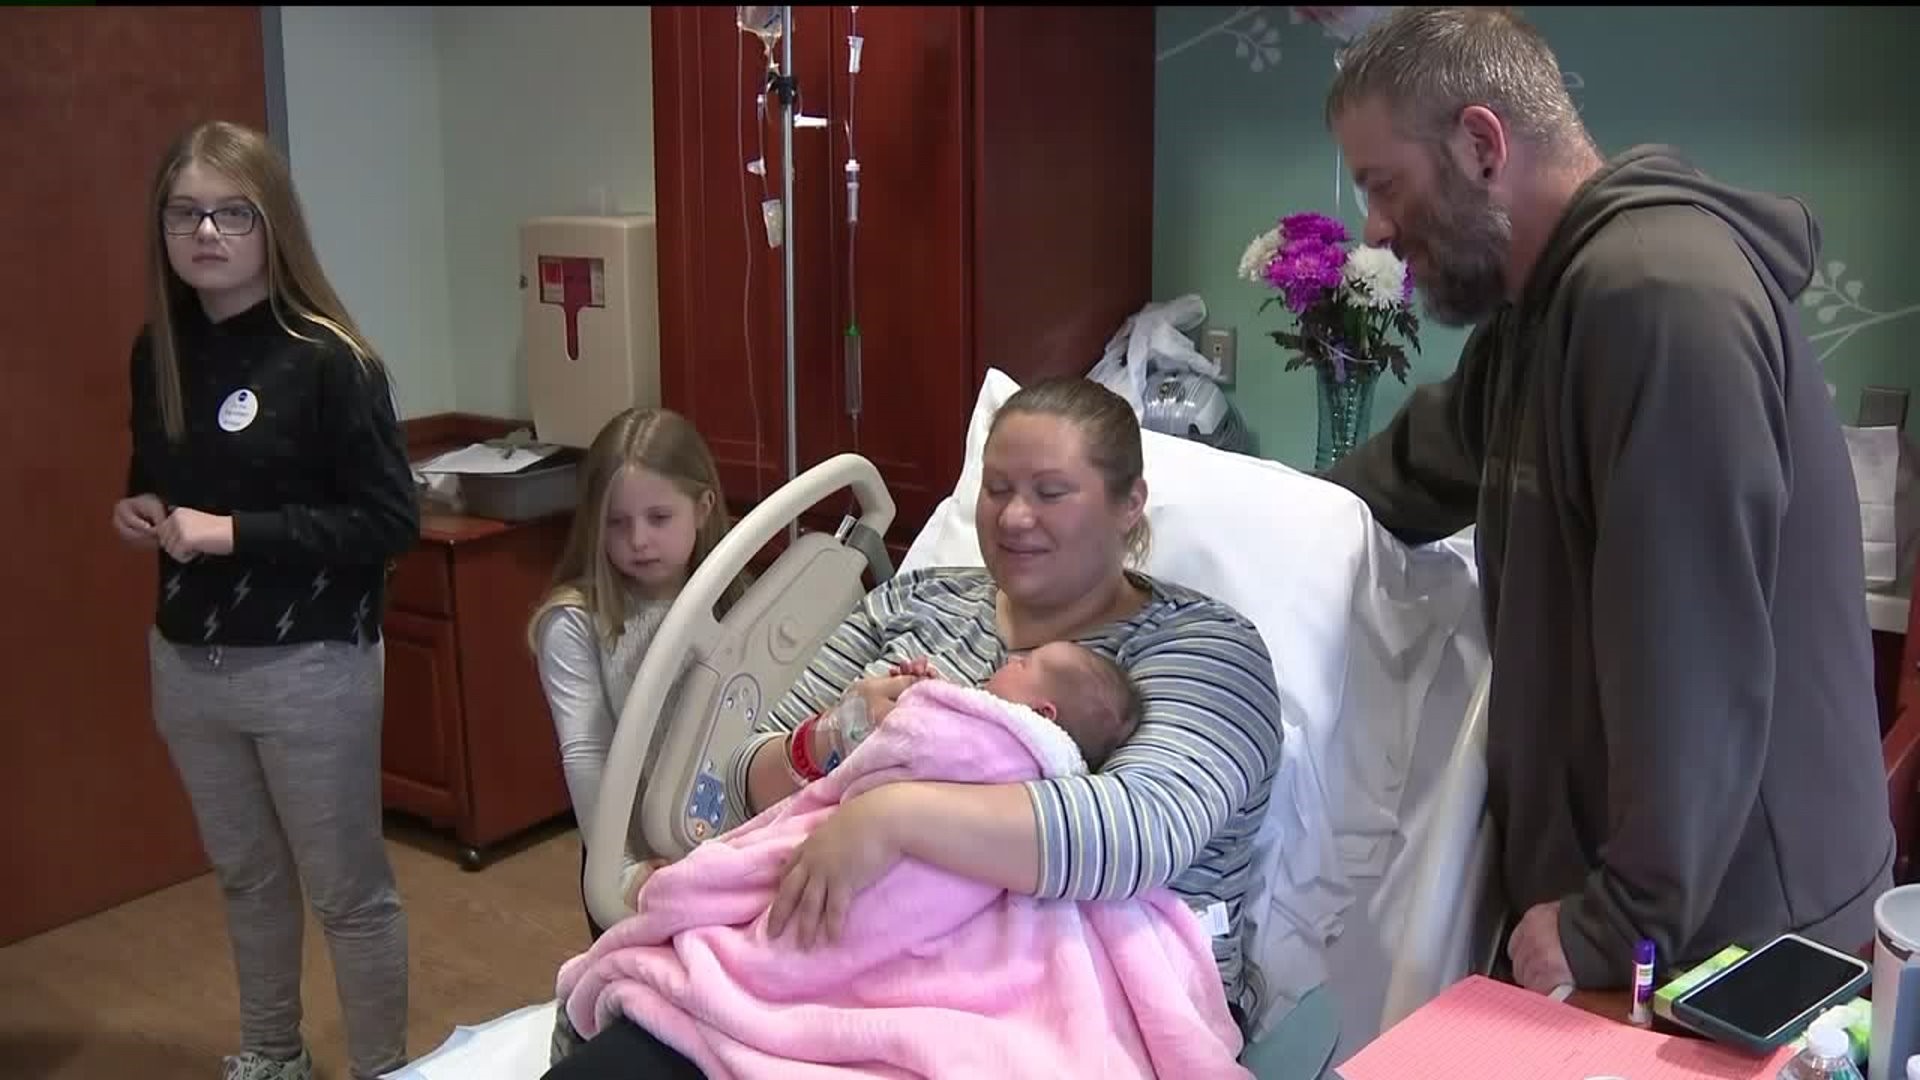 New Years Baby Born at Geisinger Medical Center